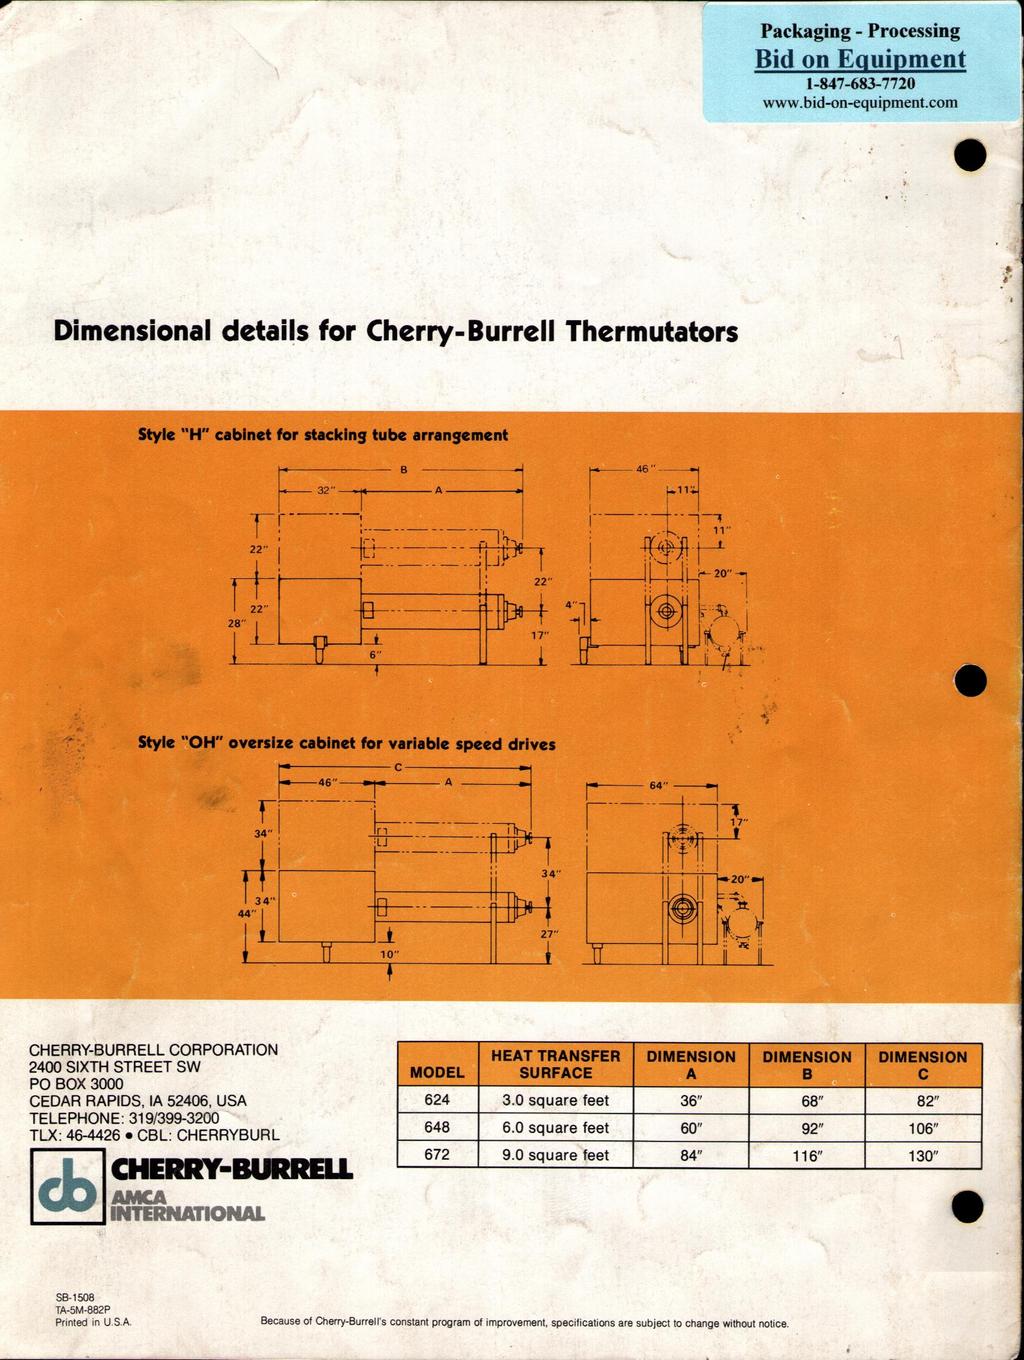 I Dimensional details for Cherry-Burrell Thermutators Style "H" cabinet for stacking tube arrangement 32" A B 46" 1 11" 22" 2 2o" 1 22" 28" Style "OH" oversize cabinet for variable speed drives